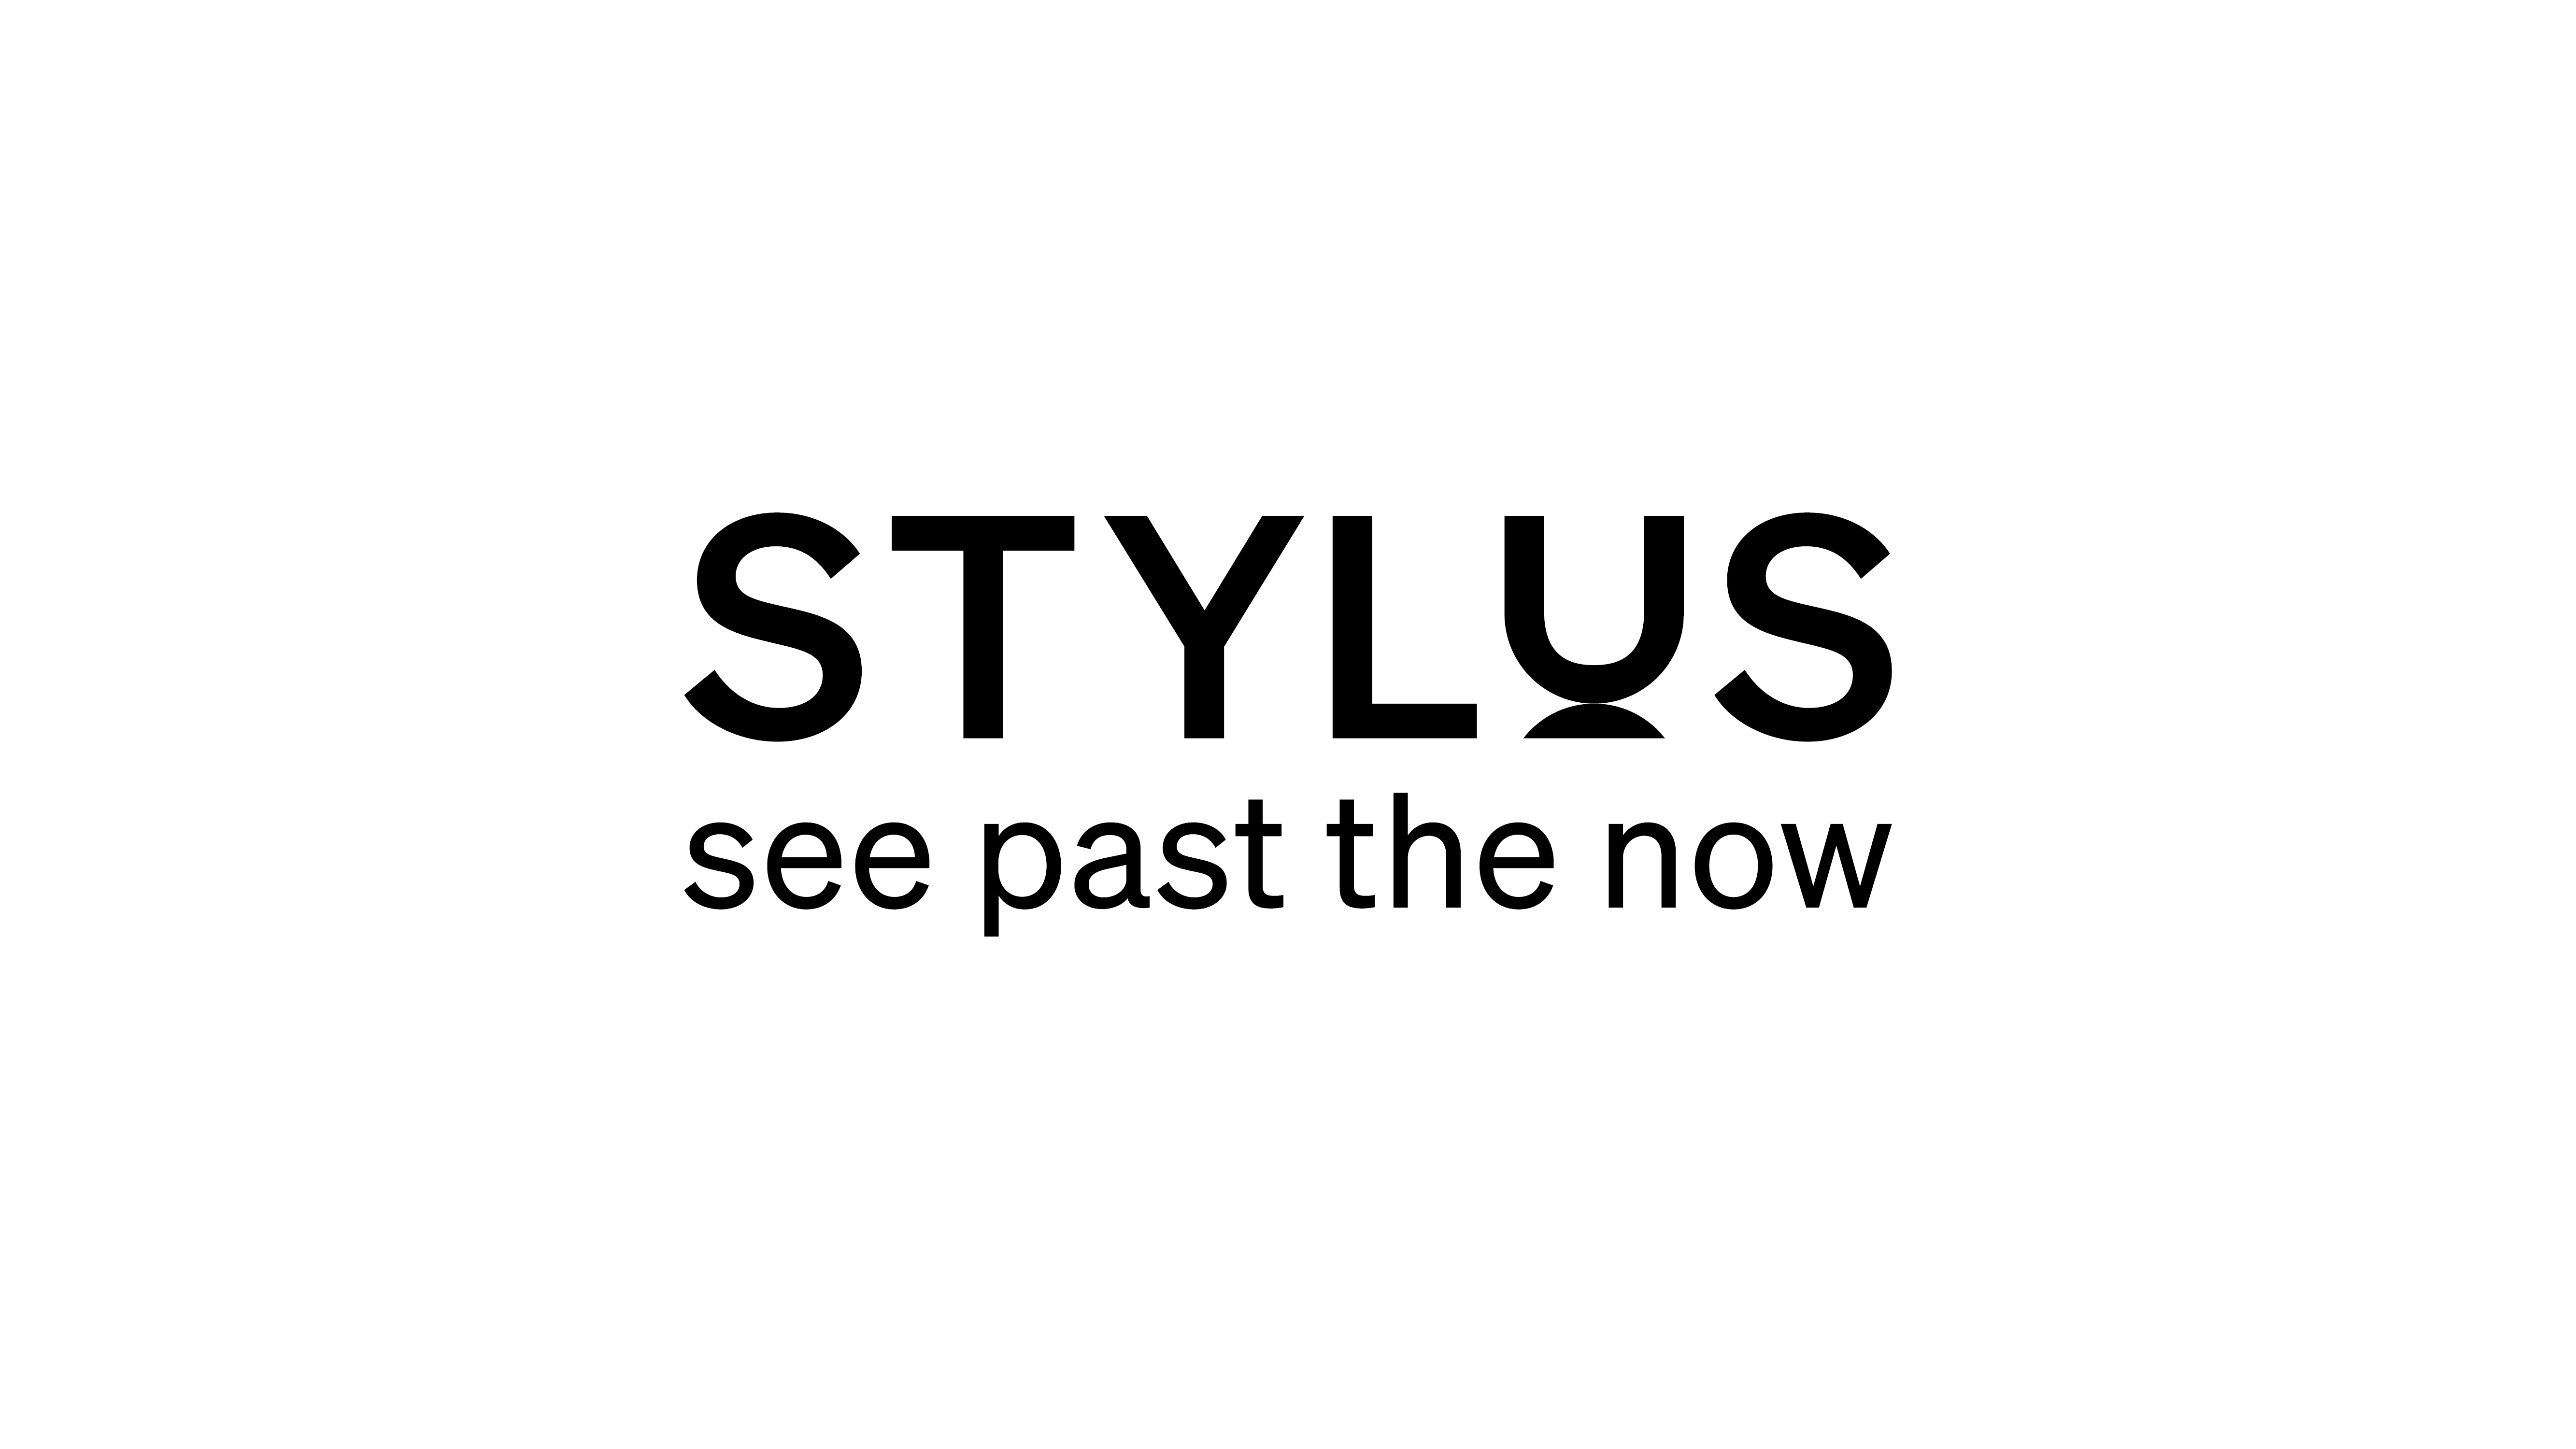 Stylus releases refreshed logo and new strapline